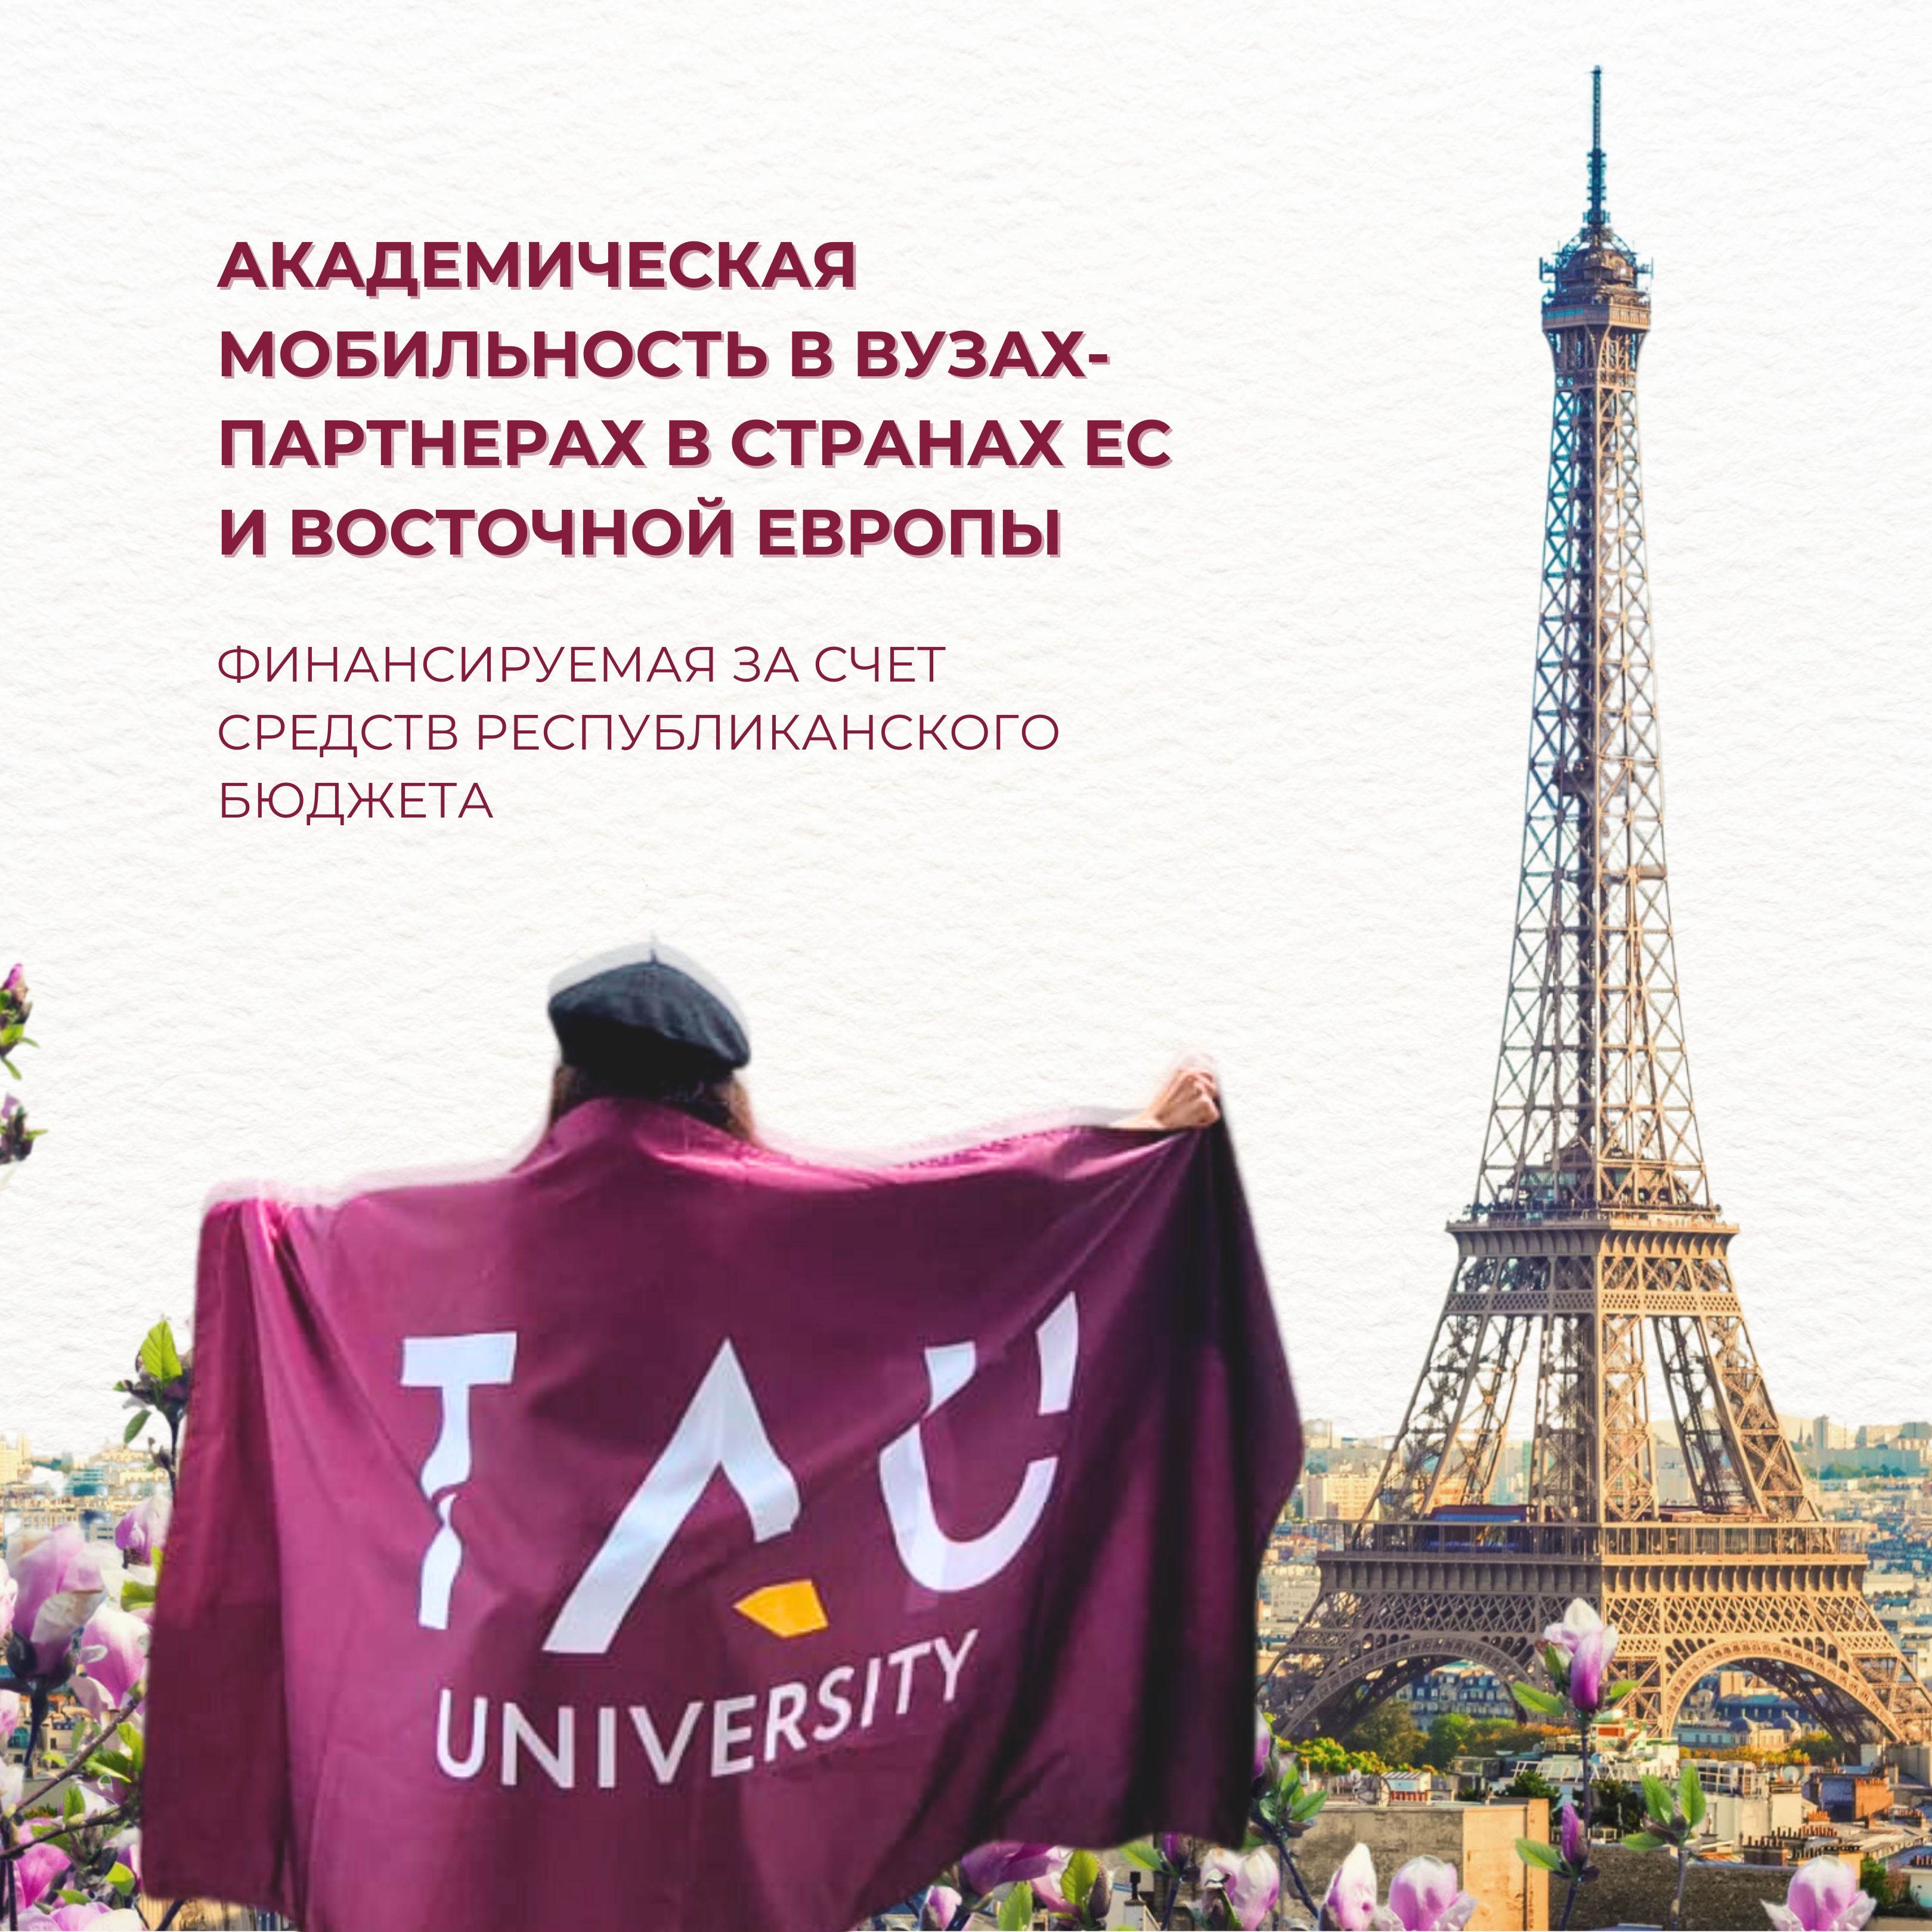 Recruitment of students for participation in the external academic mobility program at partner universities in Eurasian Union countries and Eastern Europe.